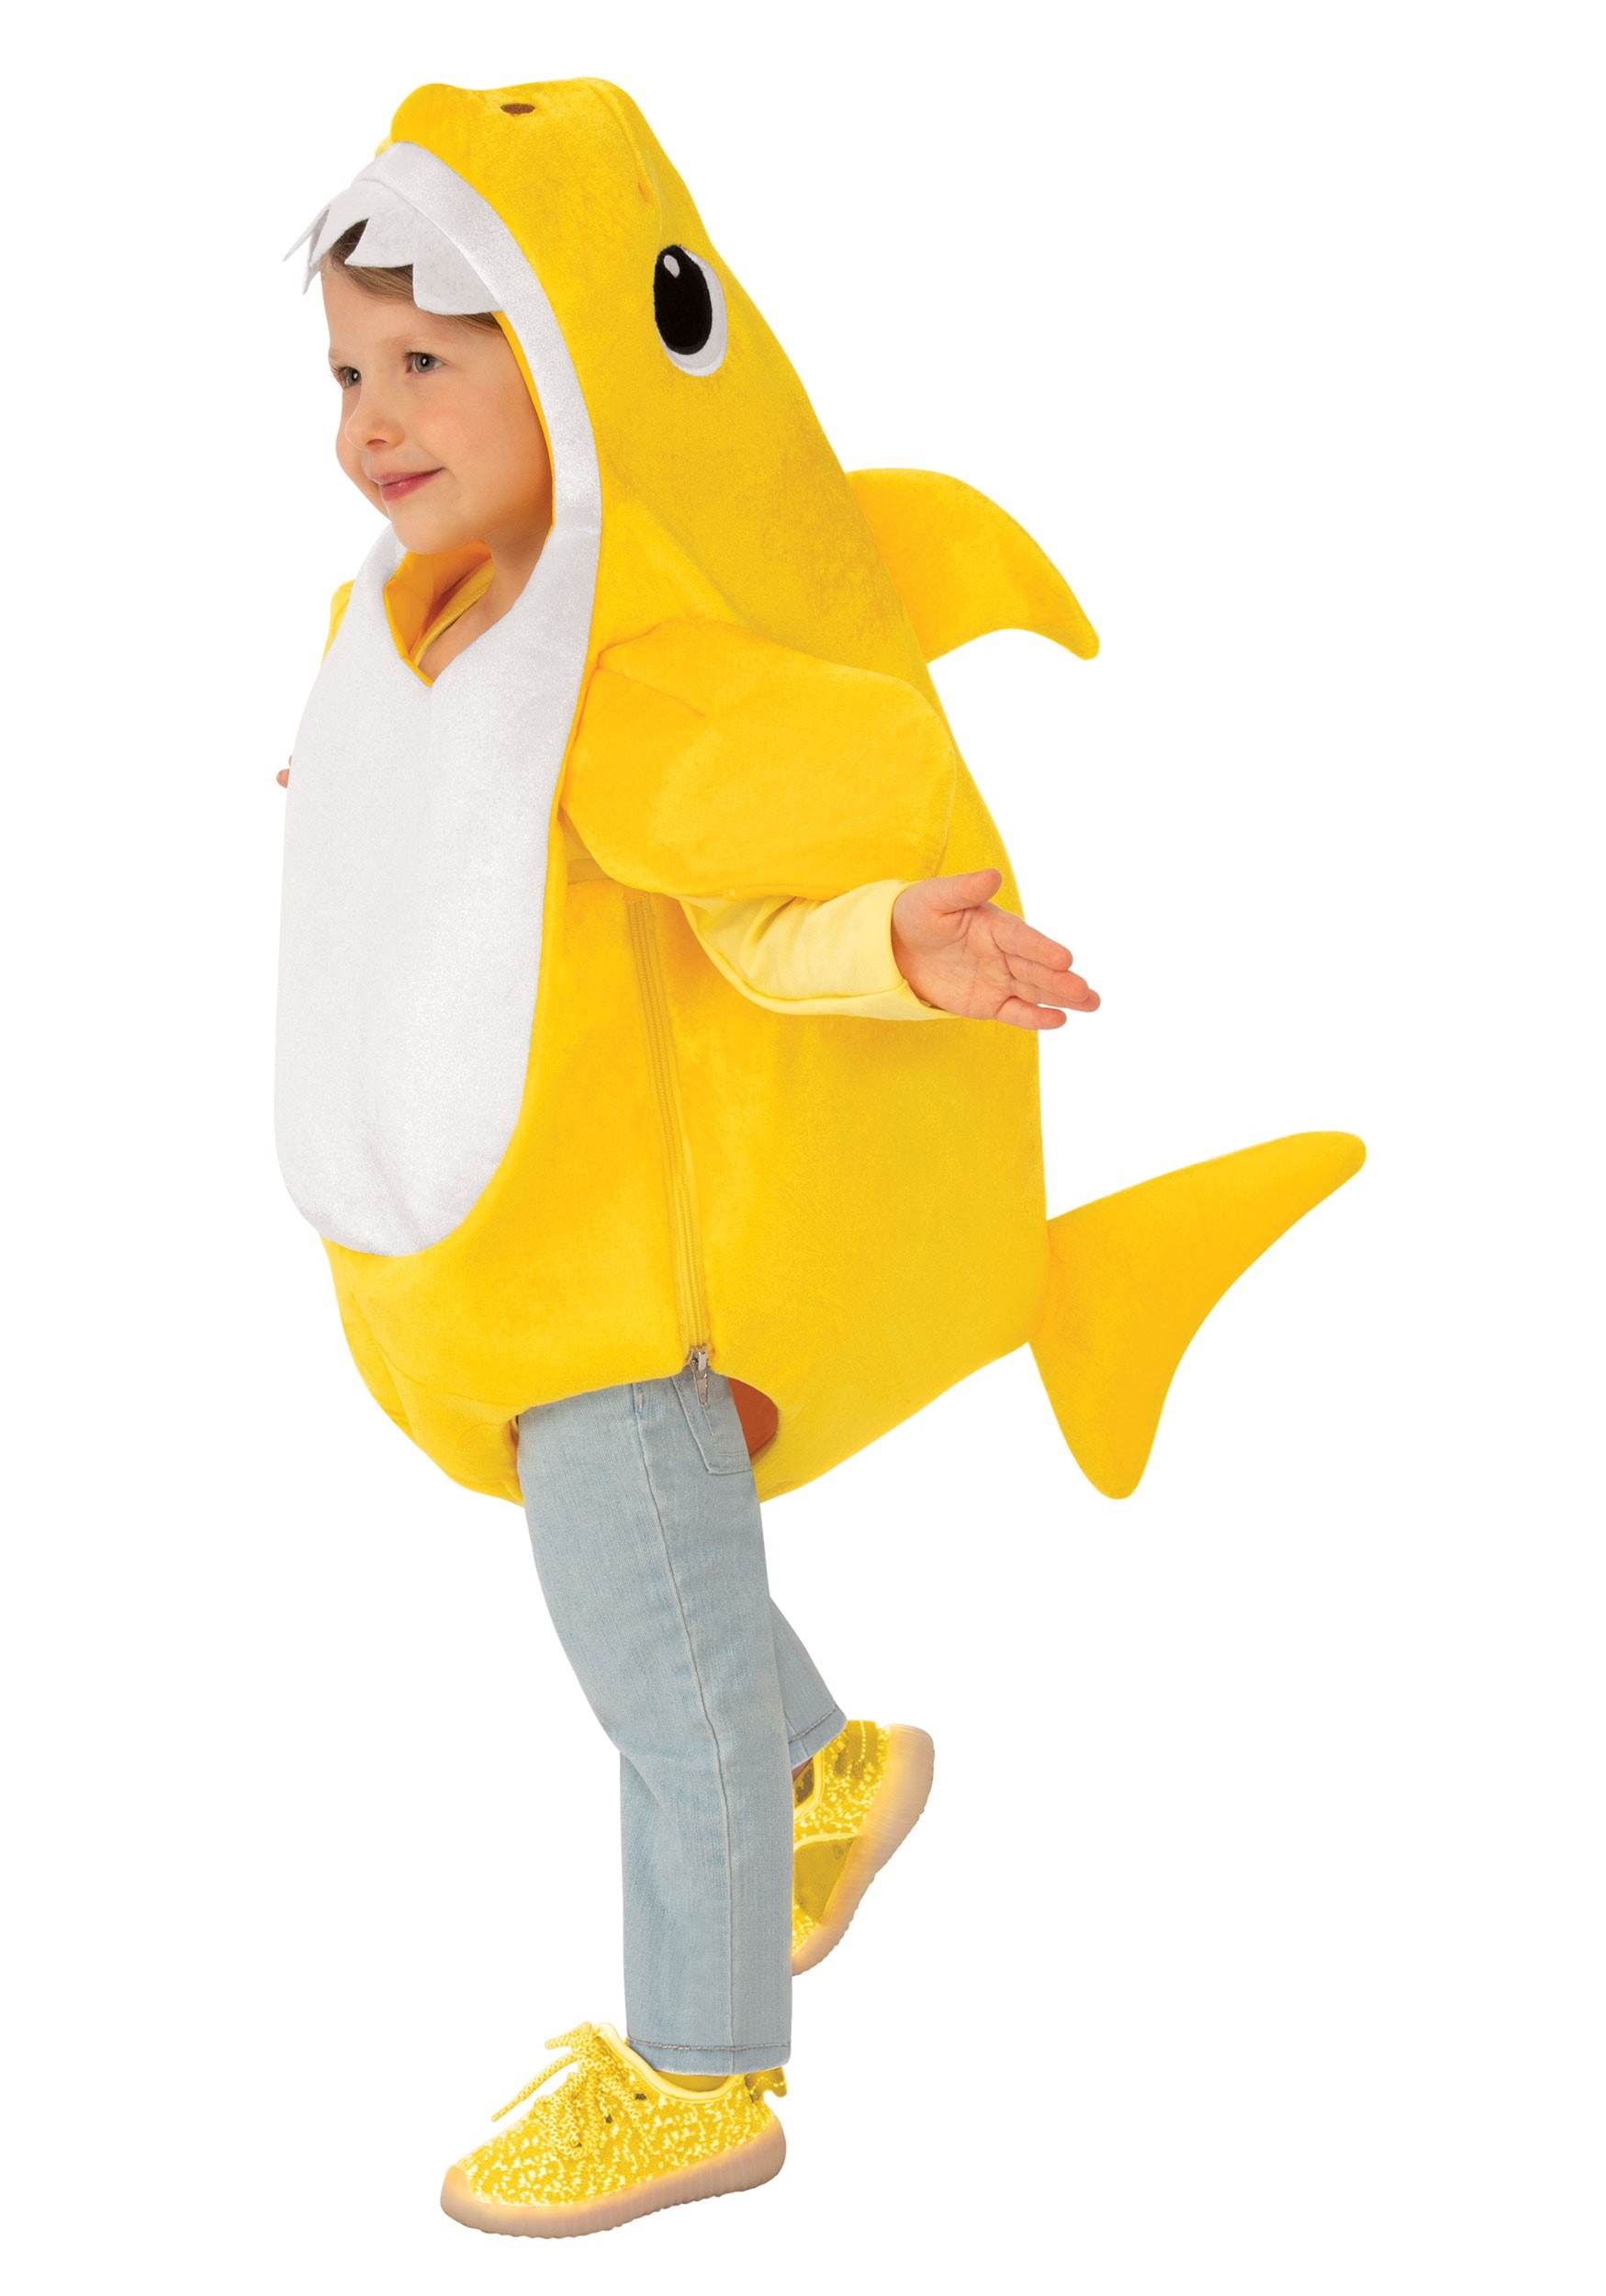 Photos - Fancy Dress Rubies Costume Co. Inc Toddler Baby Shark Costume with Sound Chip As Shown 